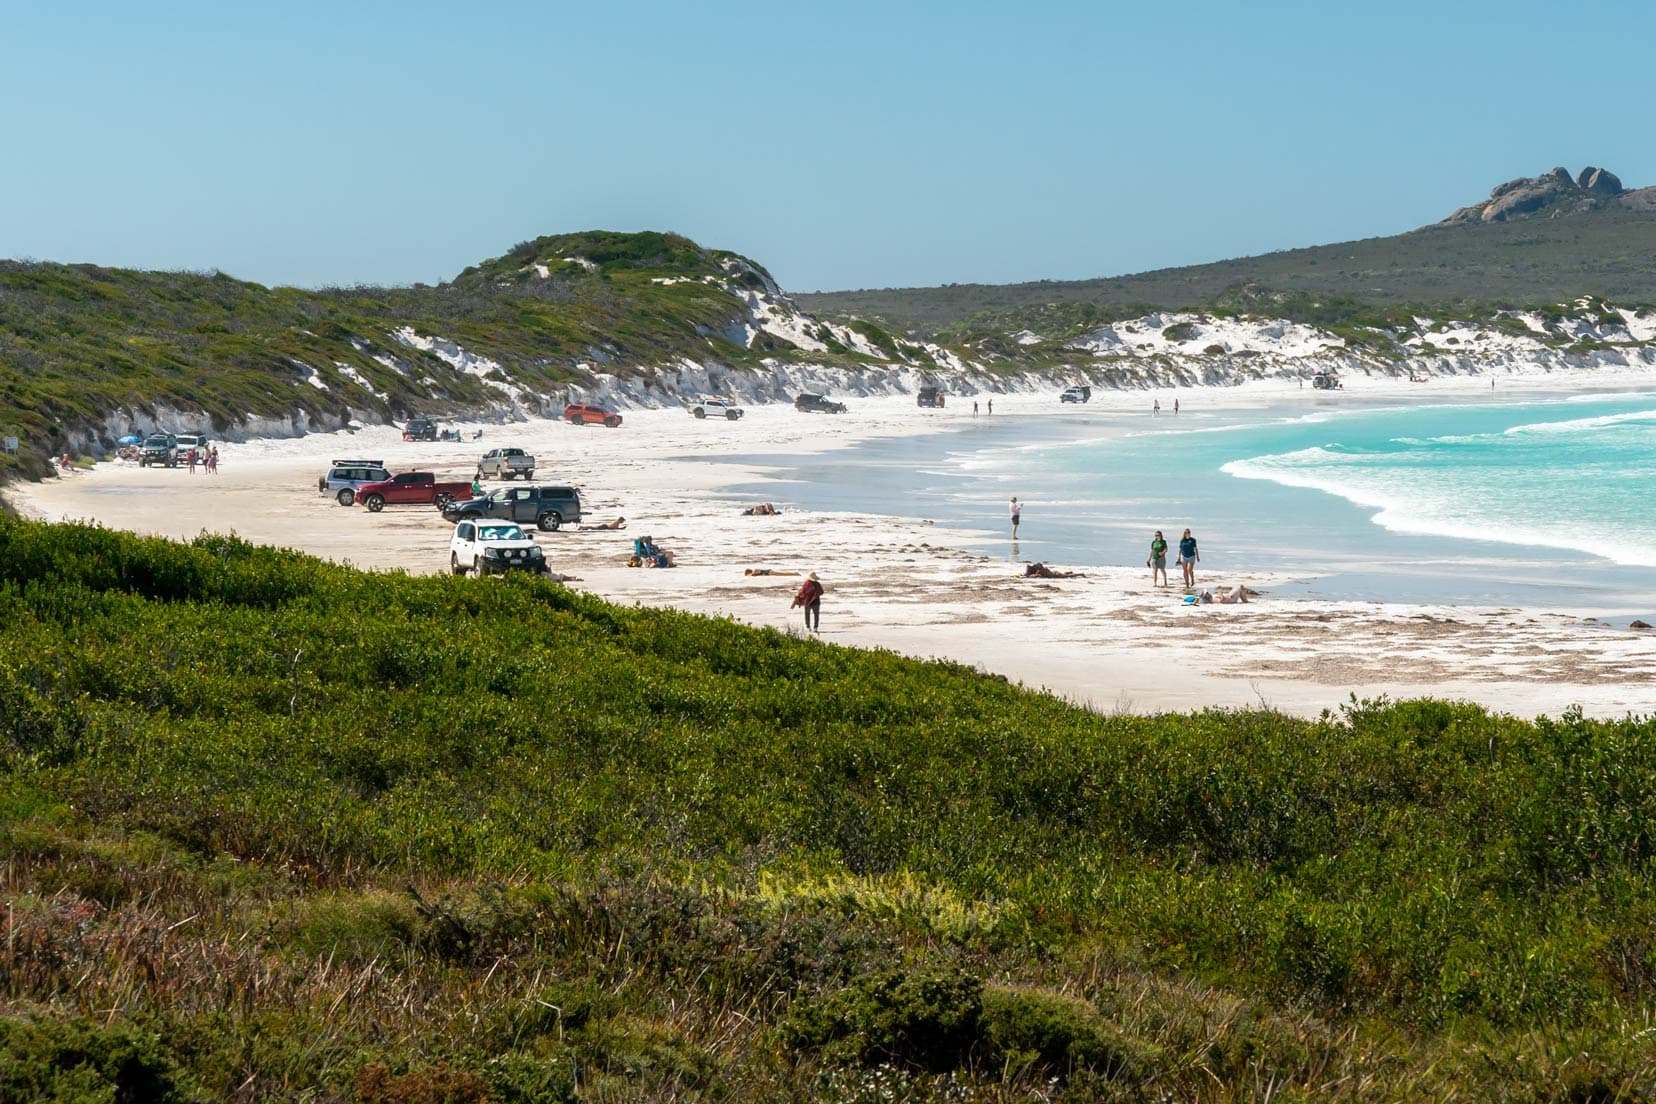 4x4 vehicles on the white sands of lucky bay